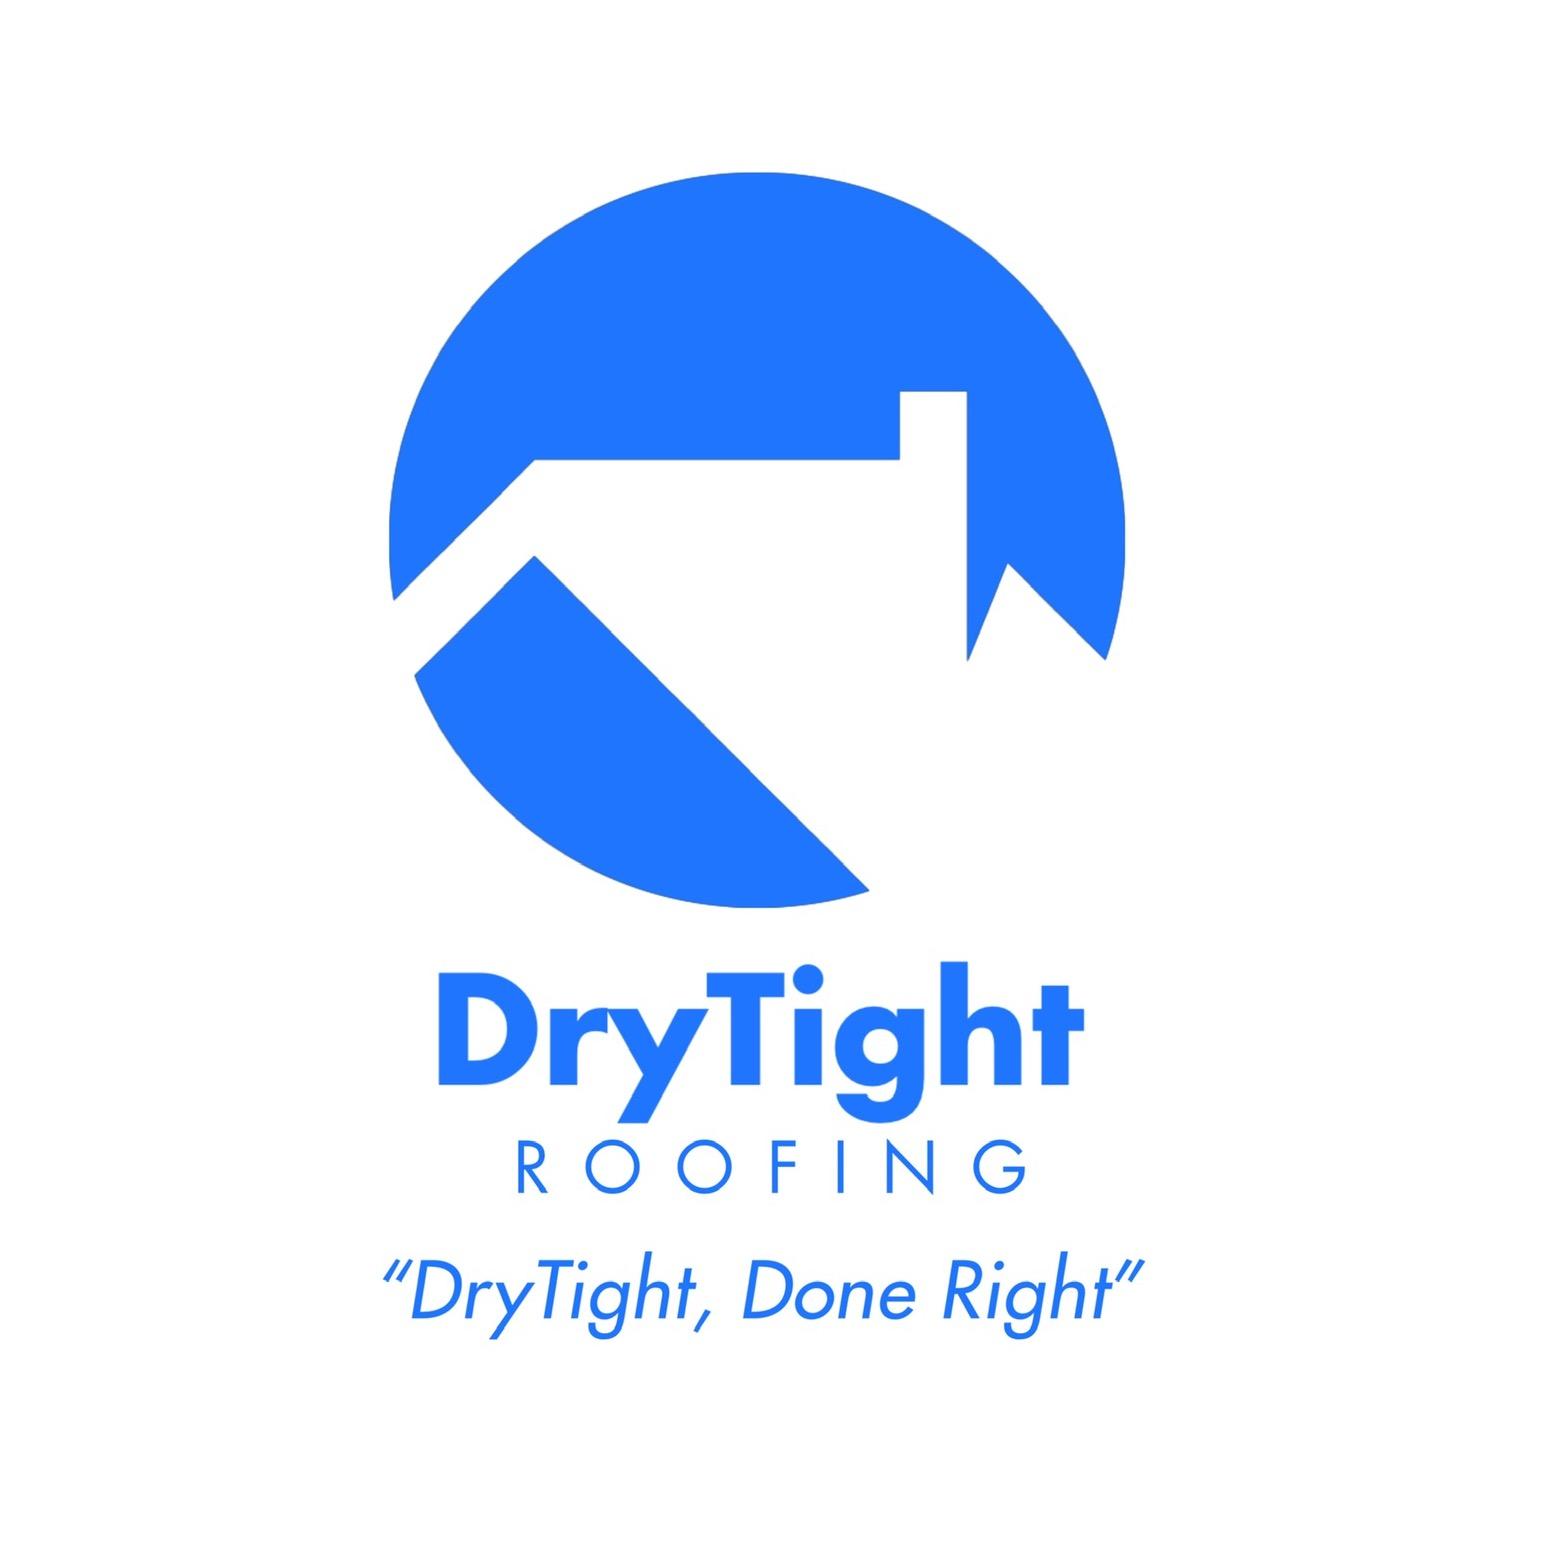 DryTight Roofing